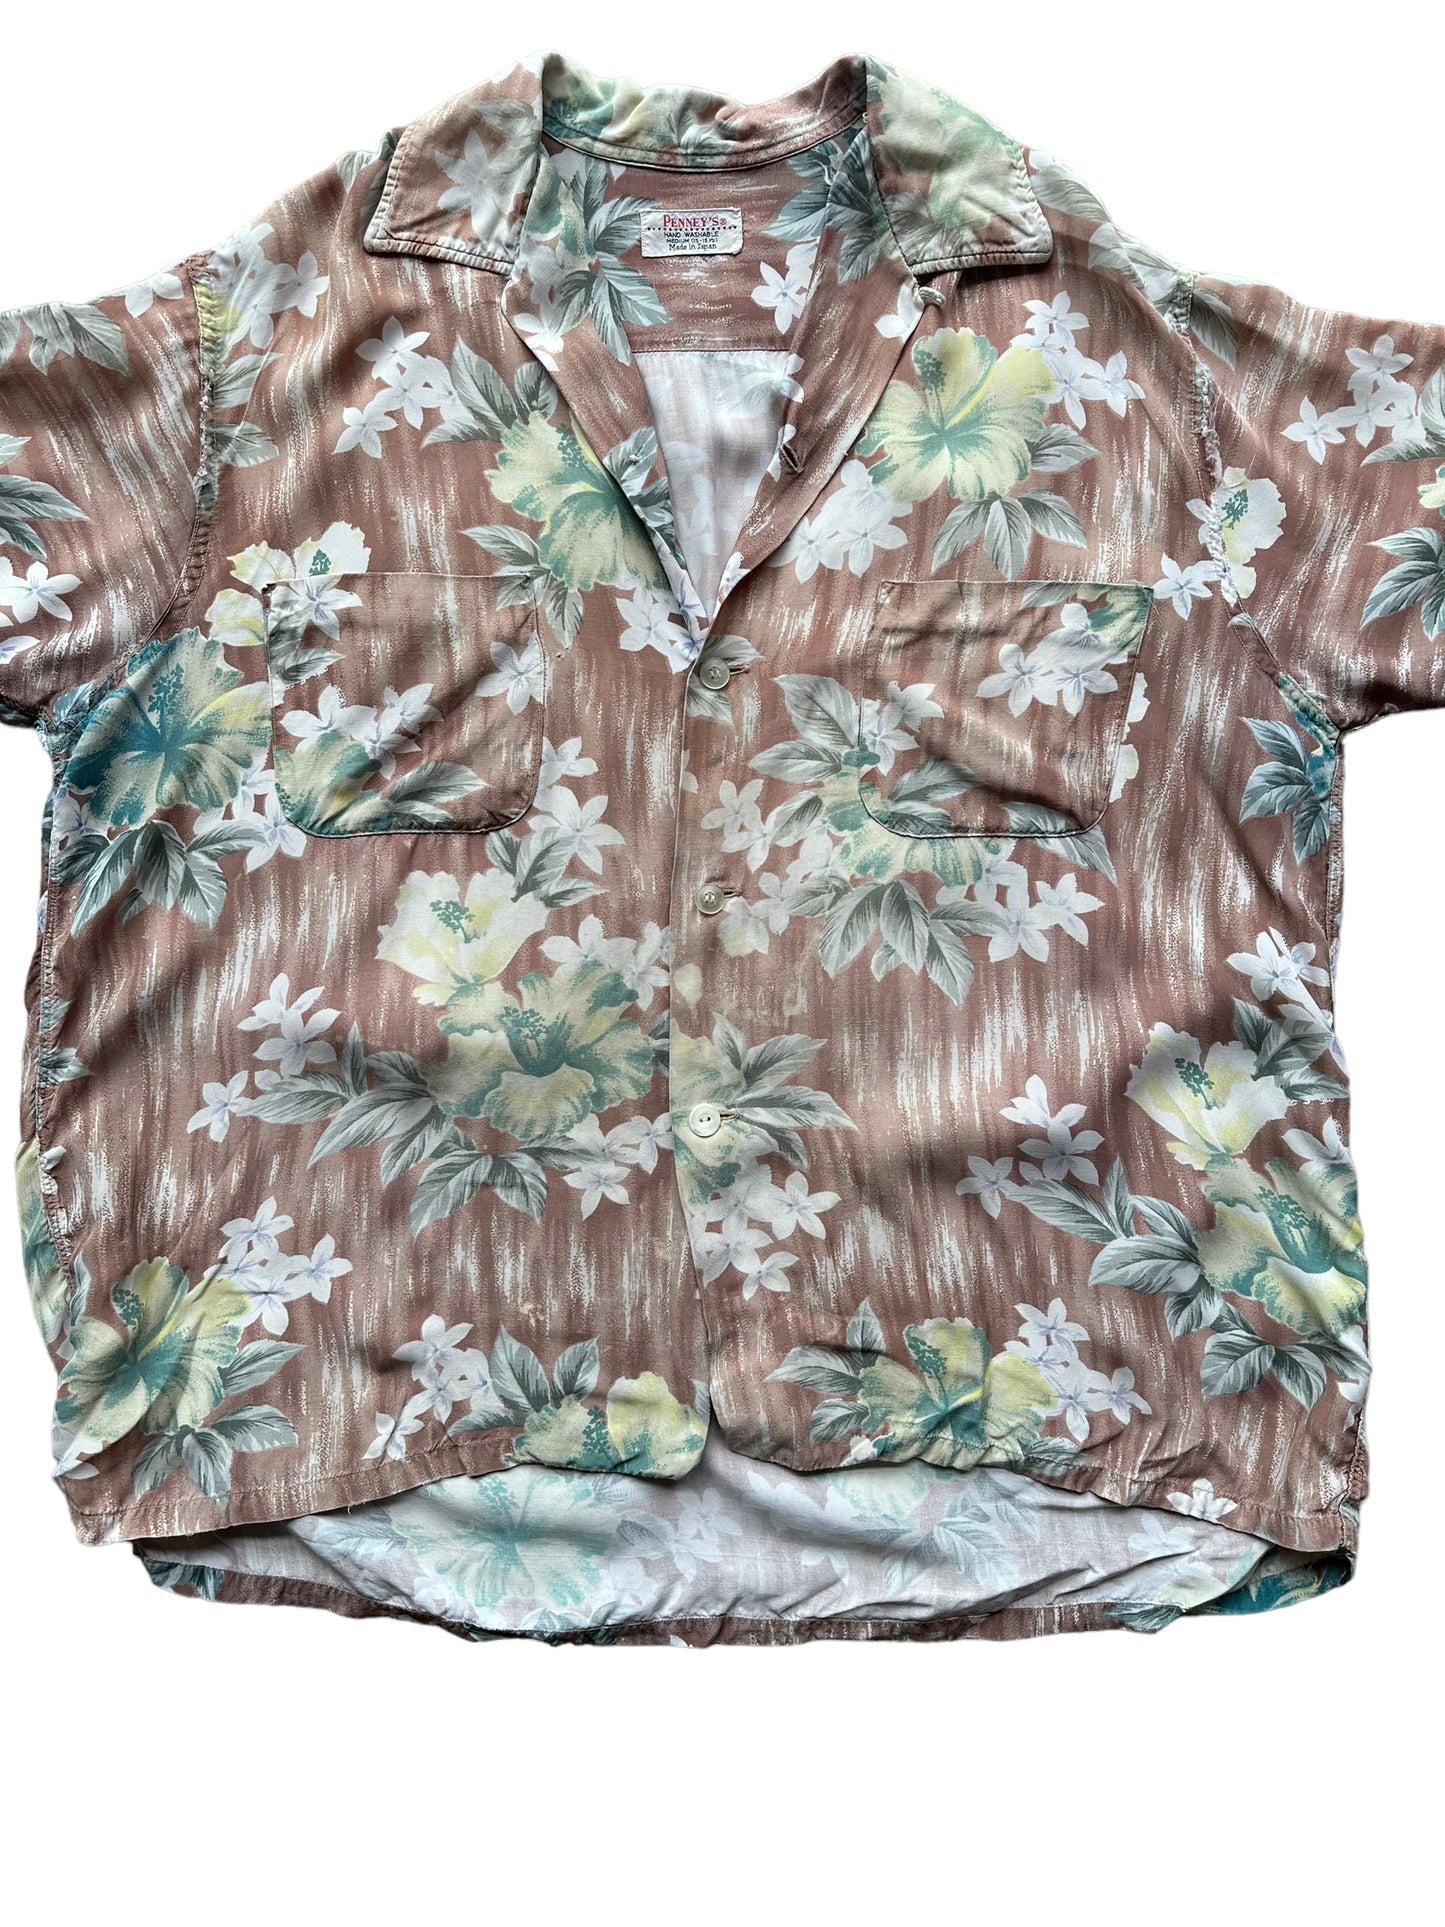 Front close up of Vintage Made in Japan Penney's Brown/Green Floral Aloha Shirt SZ M | Seattle Vintage Rayon Hawaiian Shirt | Barn Owl Vintage Clothing Seattle